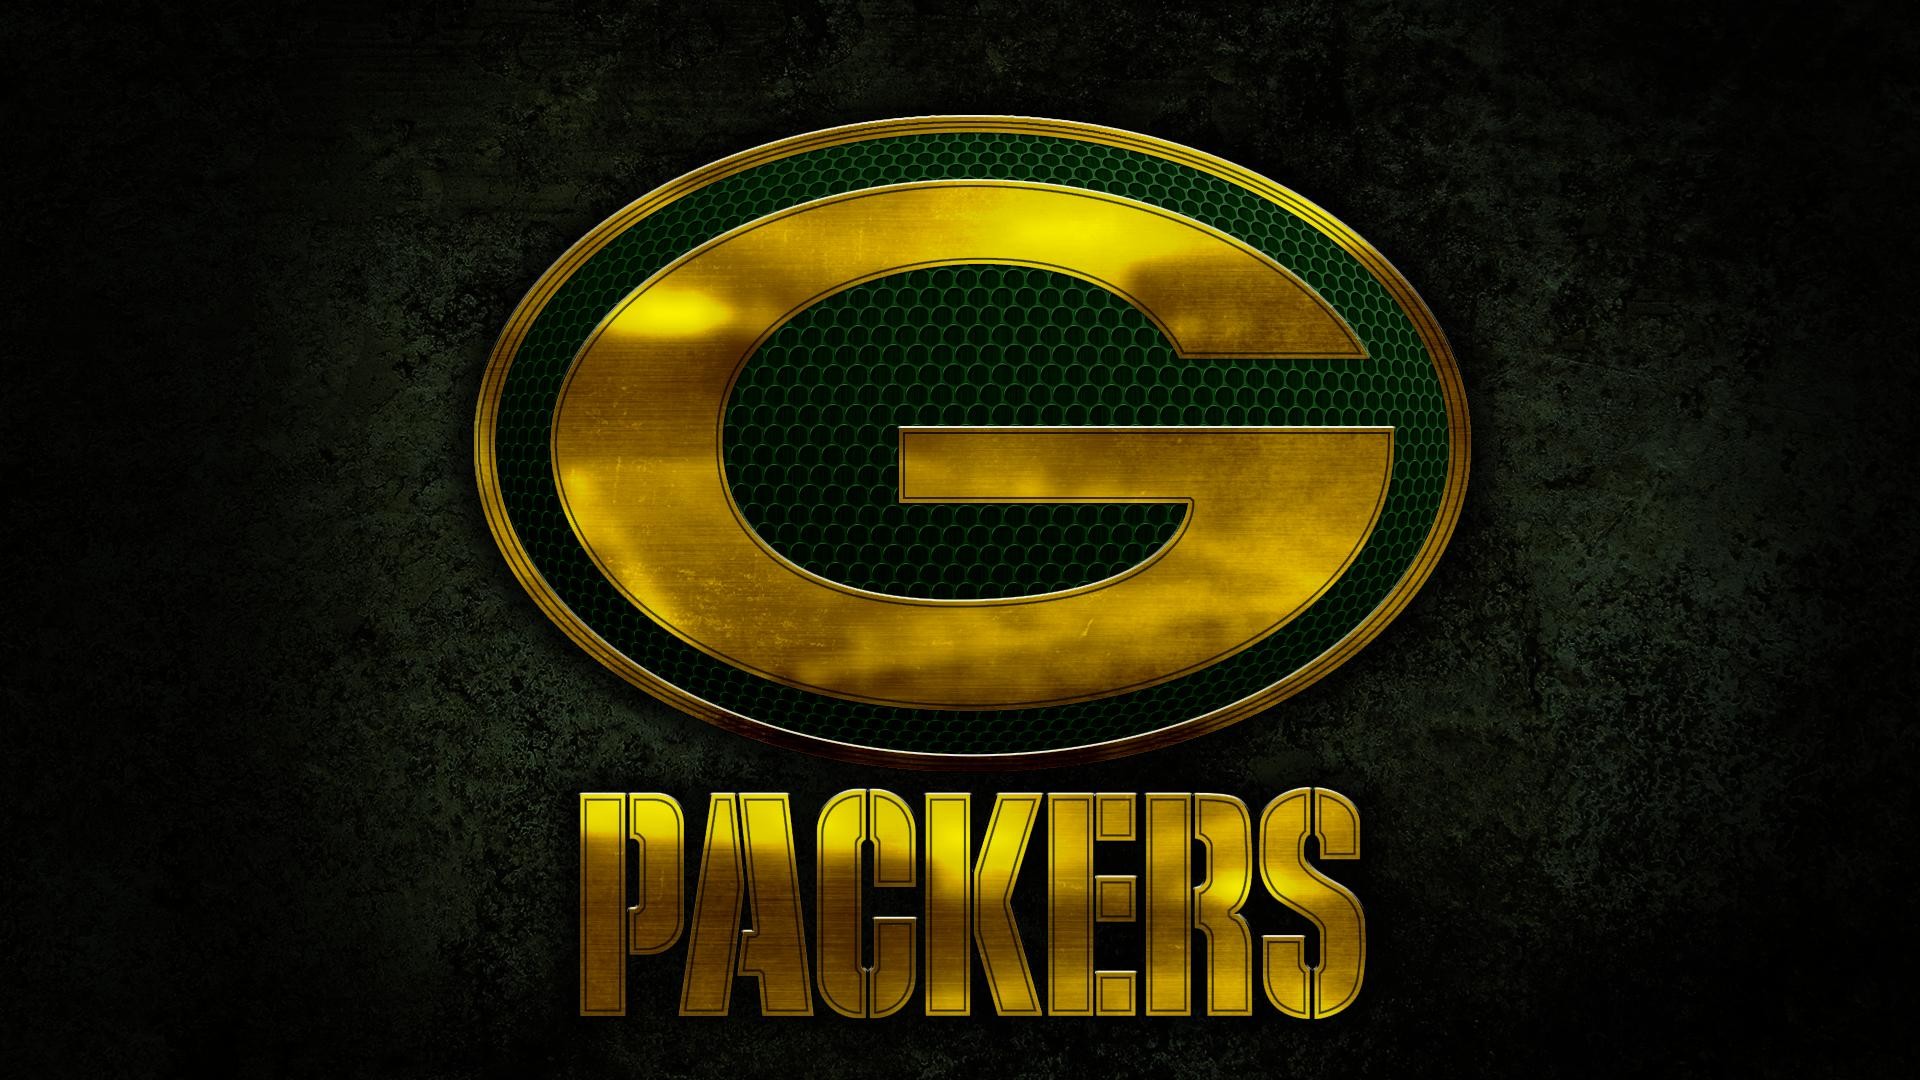 HD Desktop Wallpaper Green Bay Packers NFL with resolution 1920x1080 pixel. You can make this wallpaper for your Mac or Windows Desktop Background, iPhone, Android or Tablet and another Smartphone device